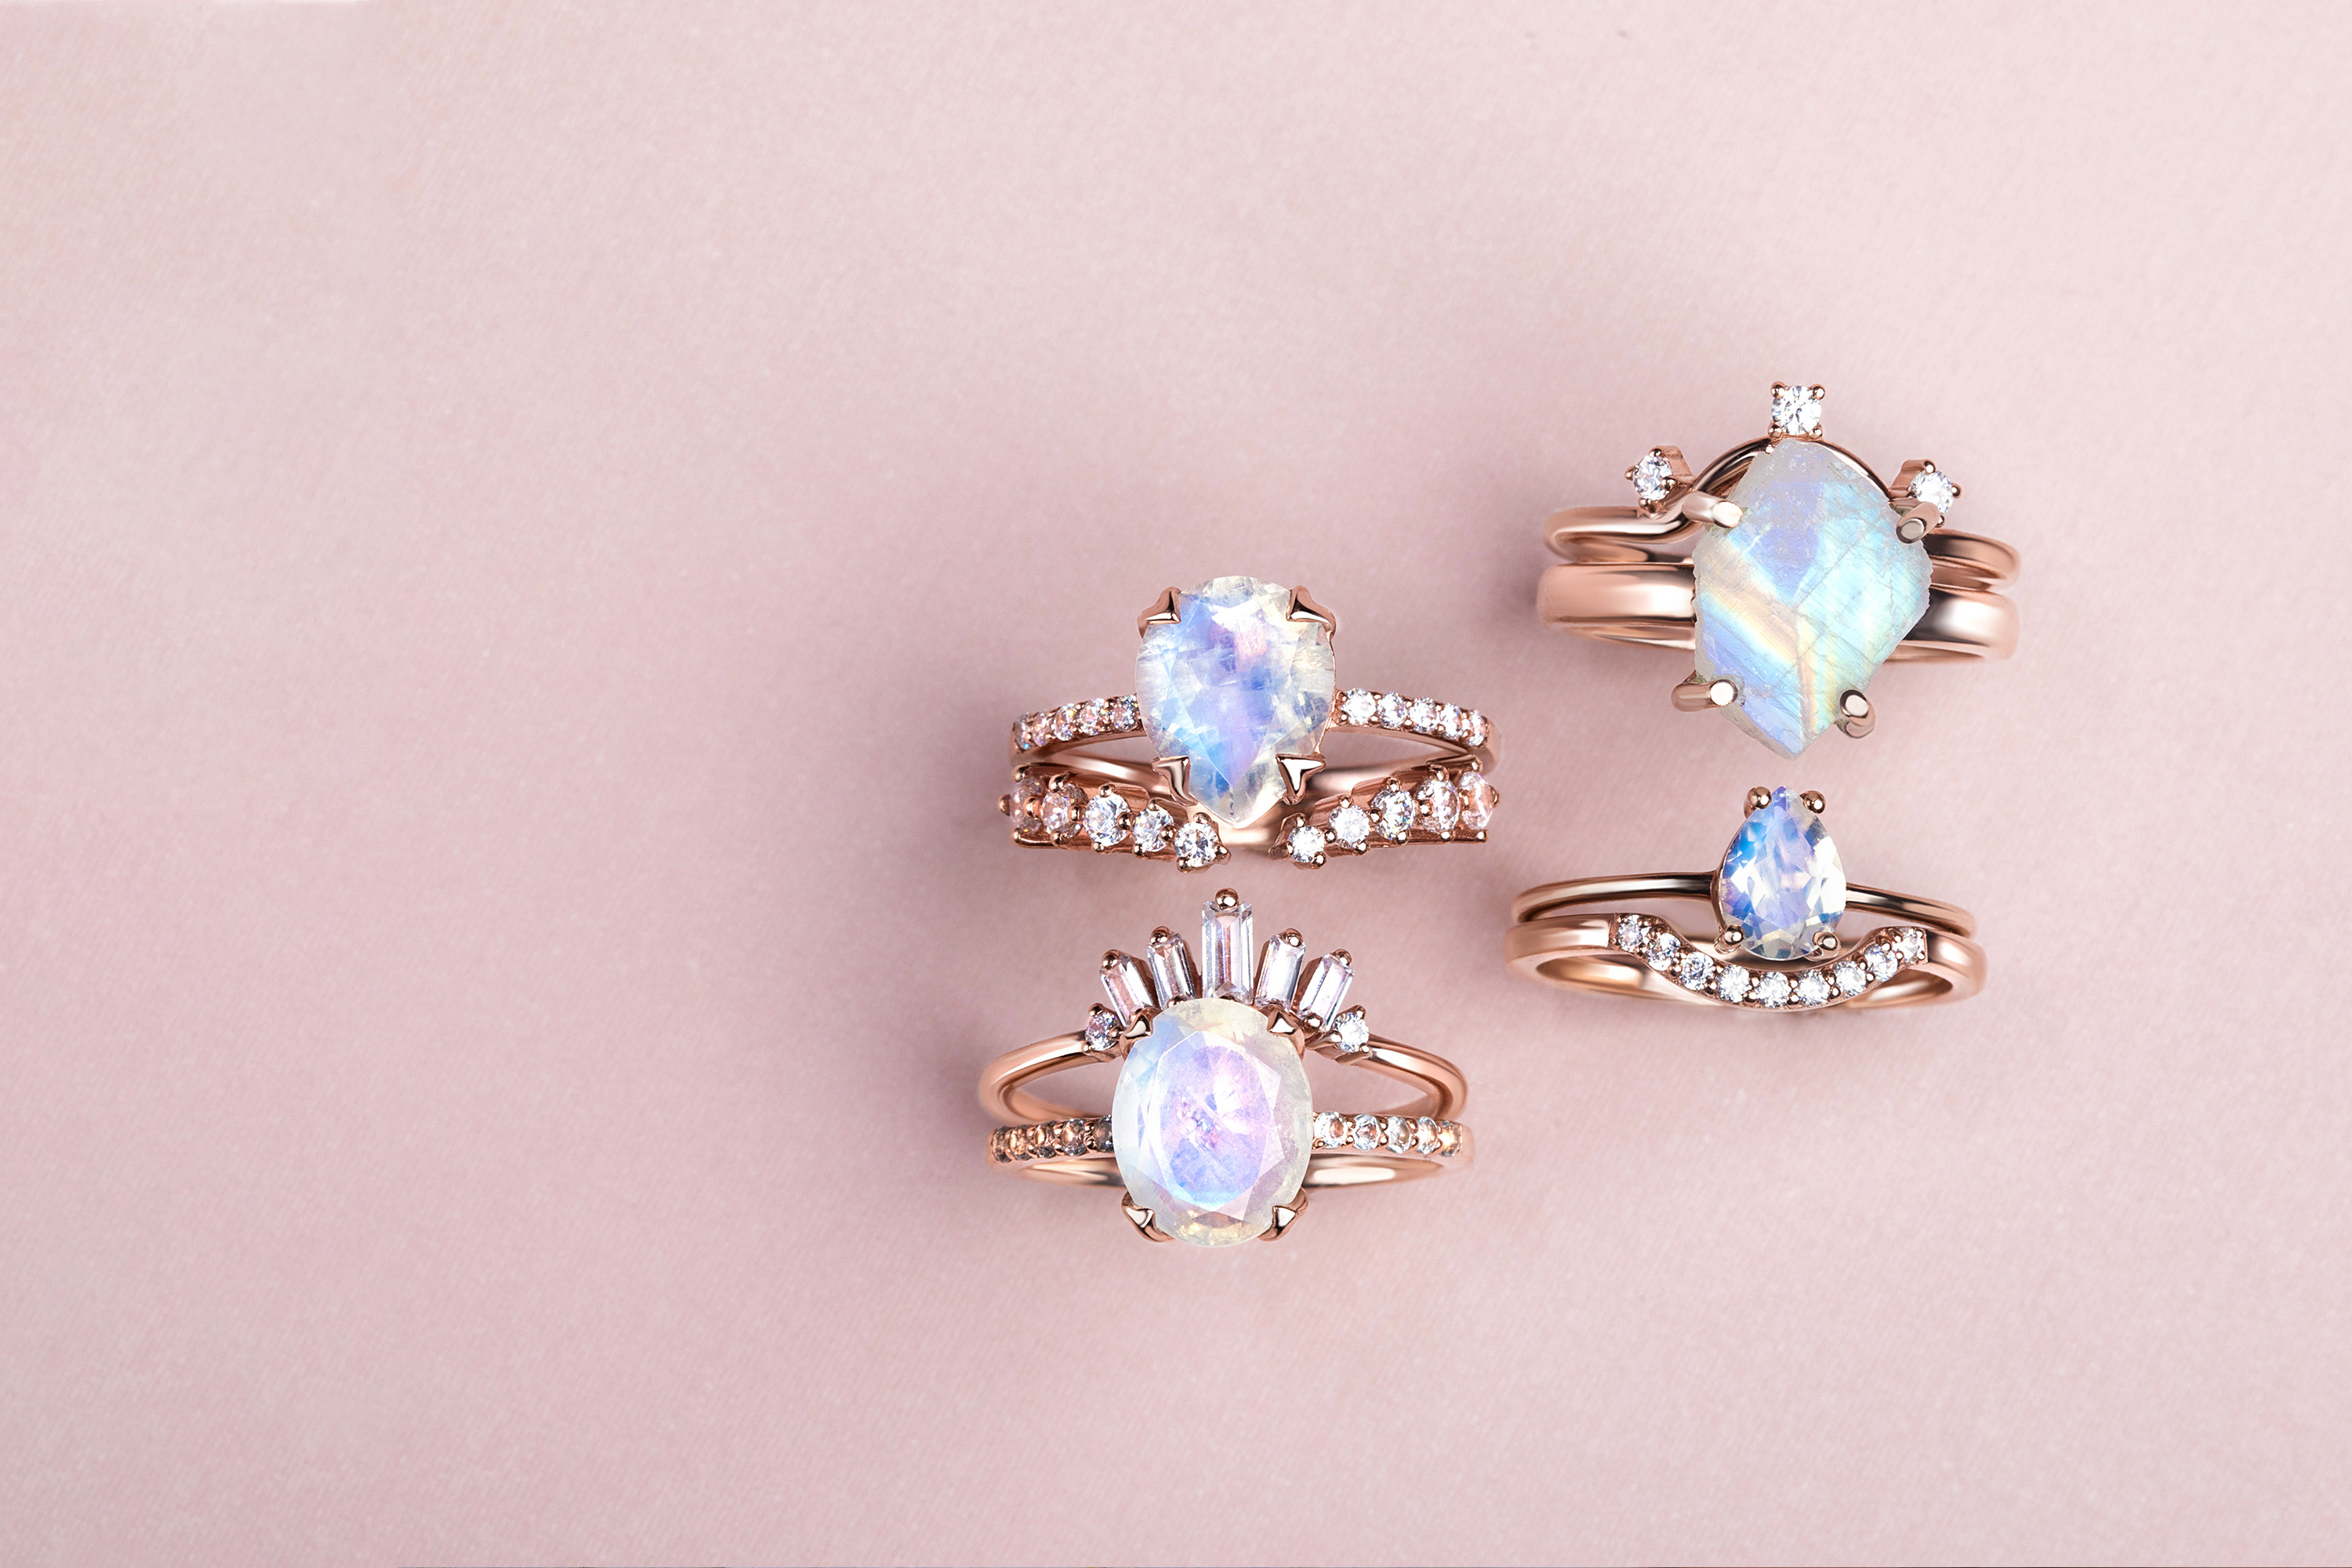 Four Moonstone rings combined with band rings in different styles are presented.